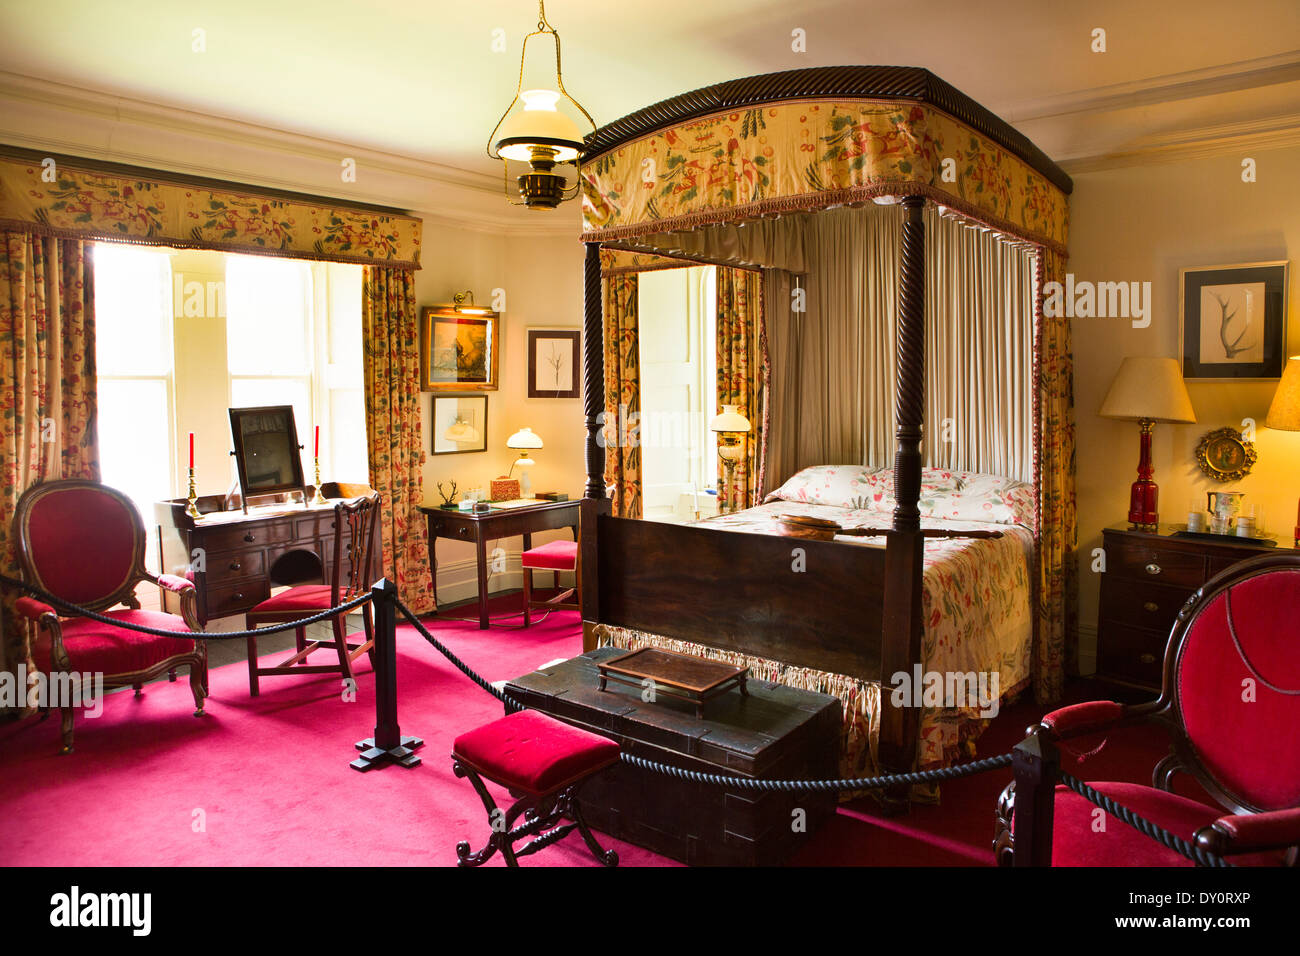 Ireland, Co Donegal, Glenveagh Castle, interior, Guest Bedroom Stock Photo